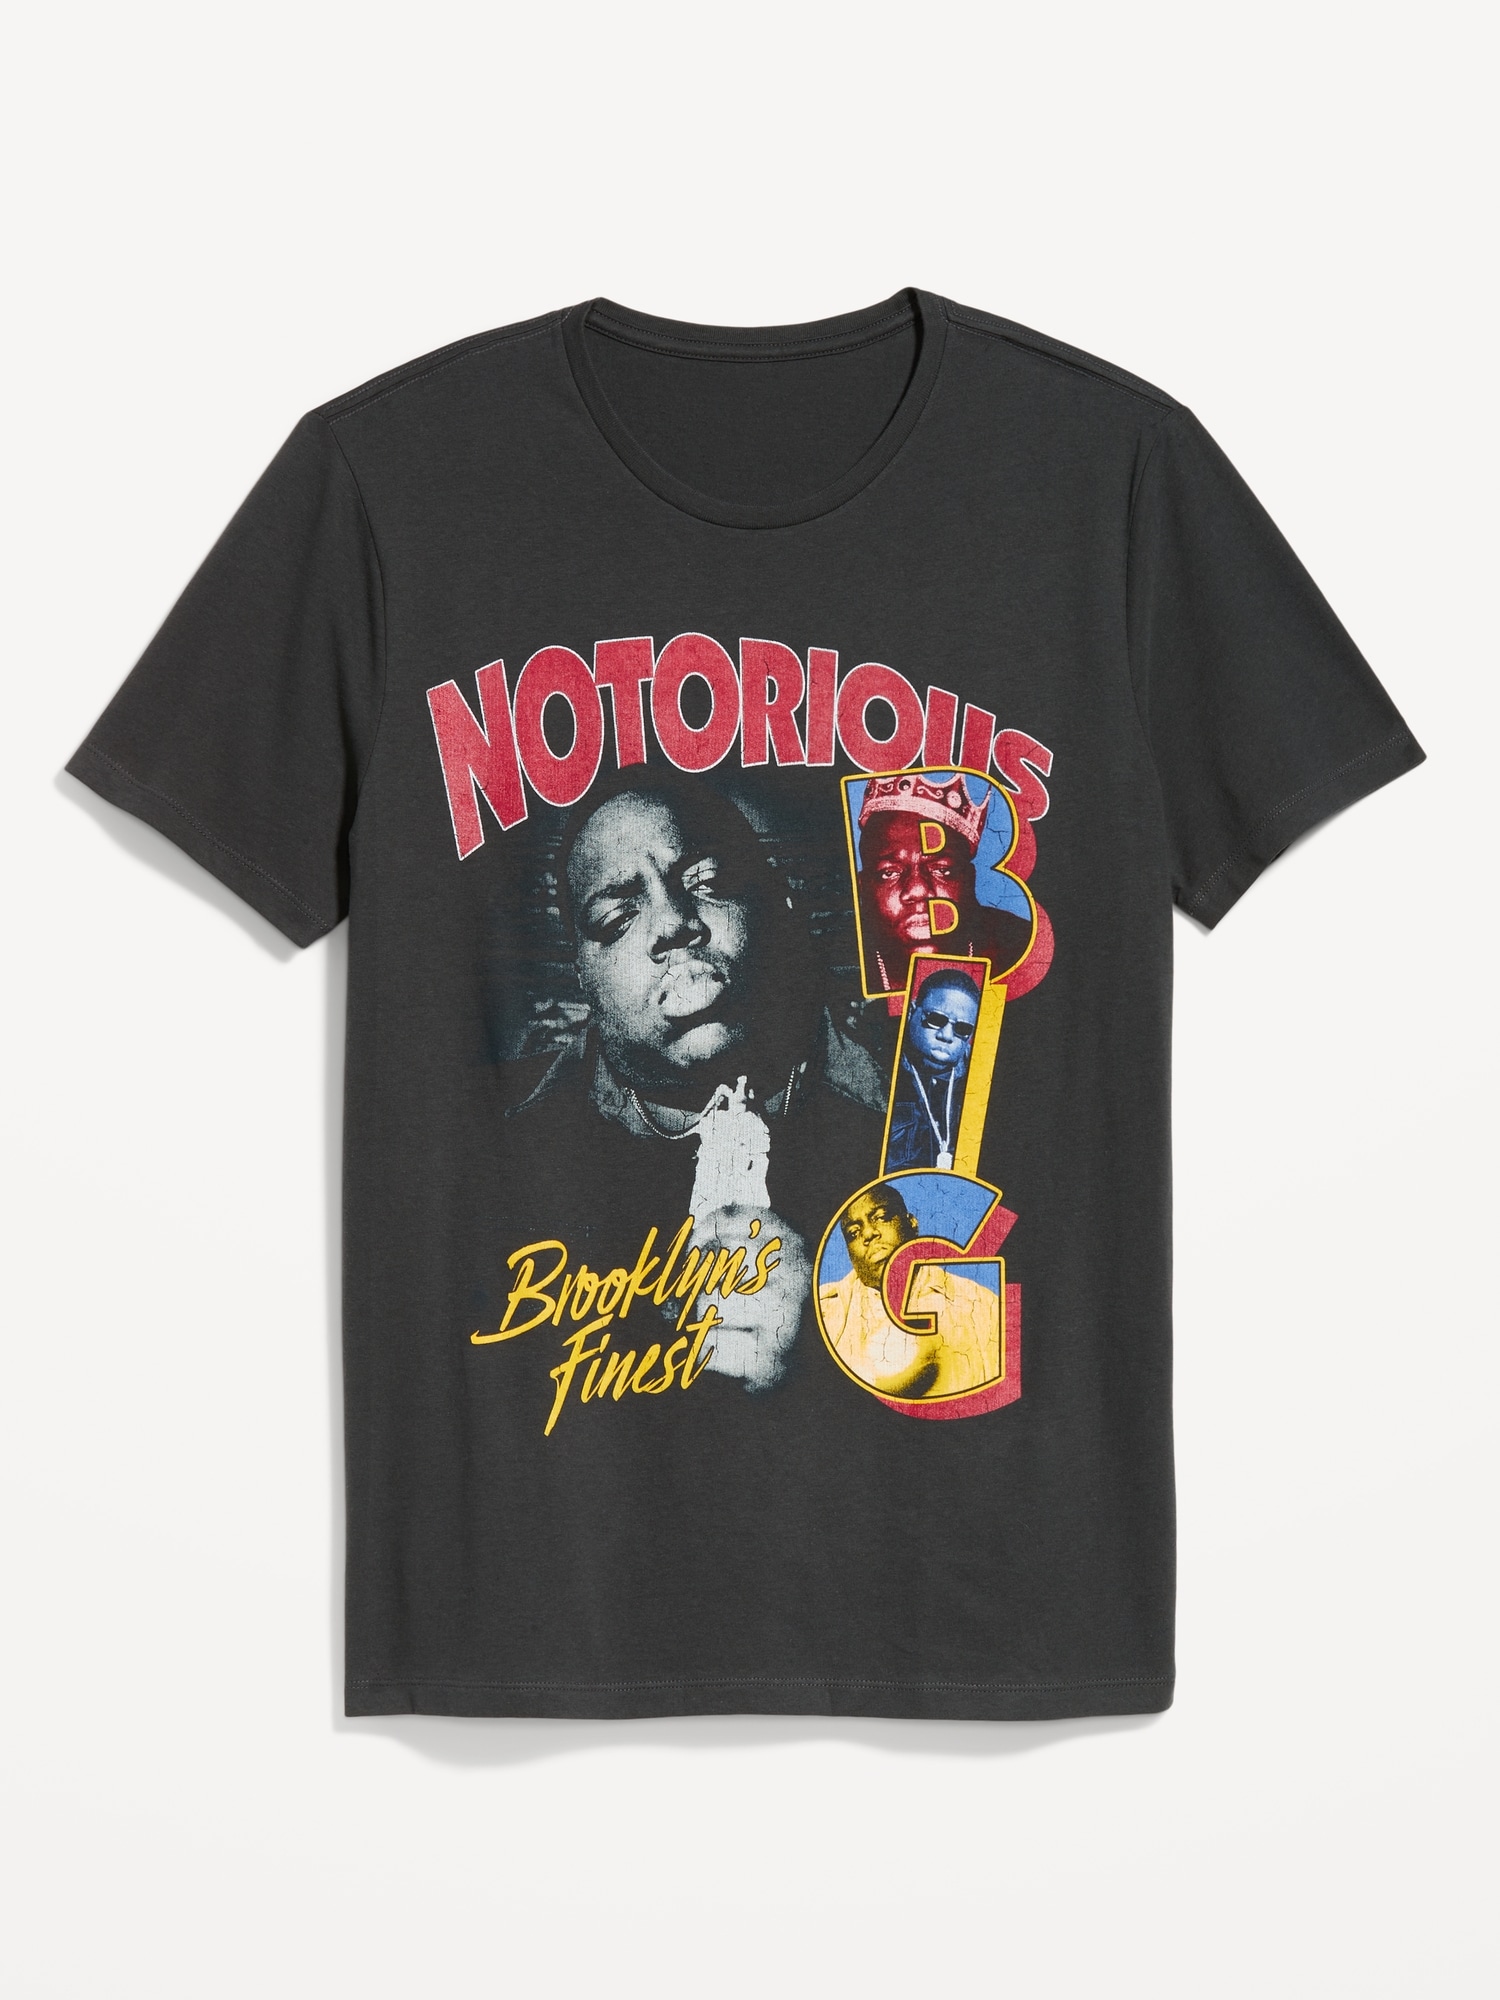 Notorious B.I.G. Biggie Smalls™ Gender-Neutral T-Shirt for Adults